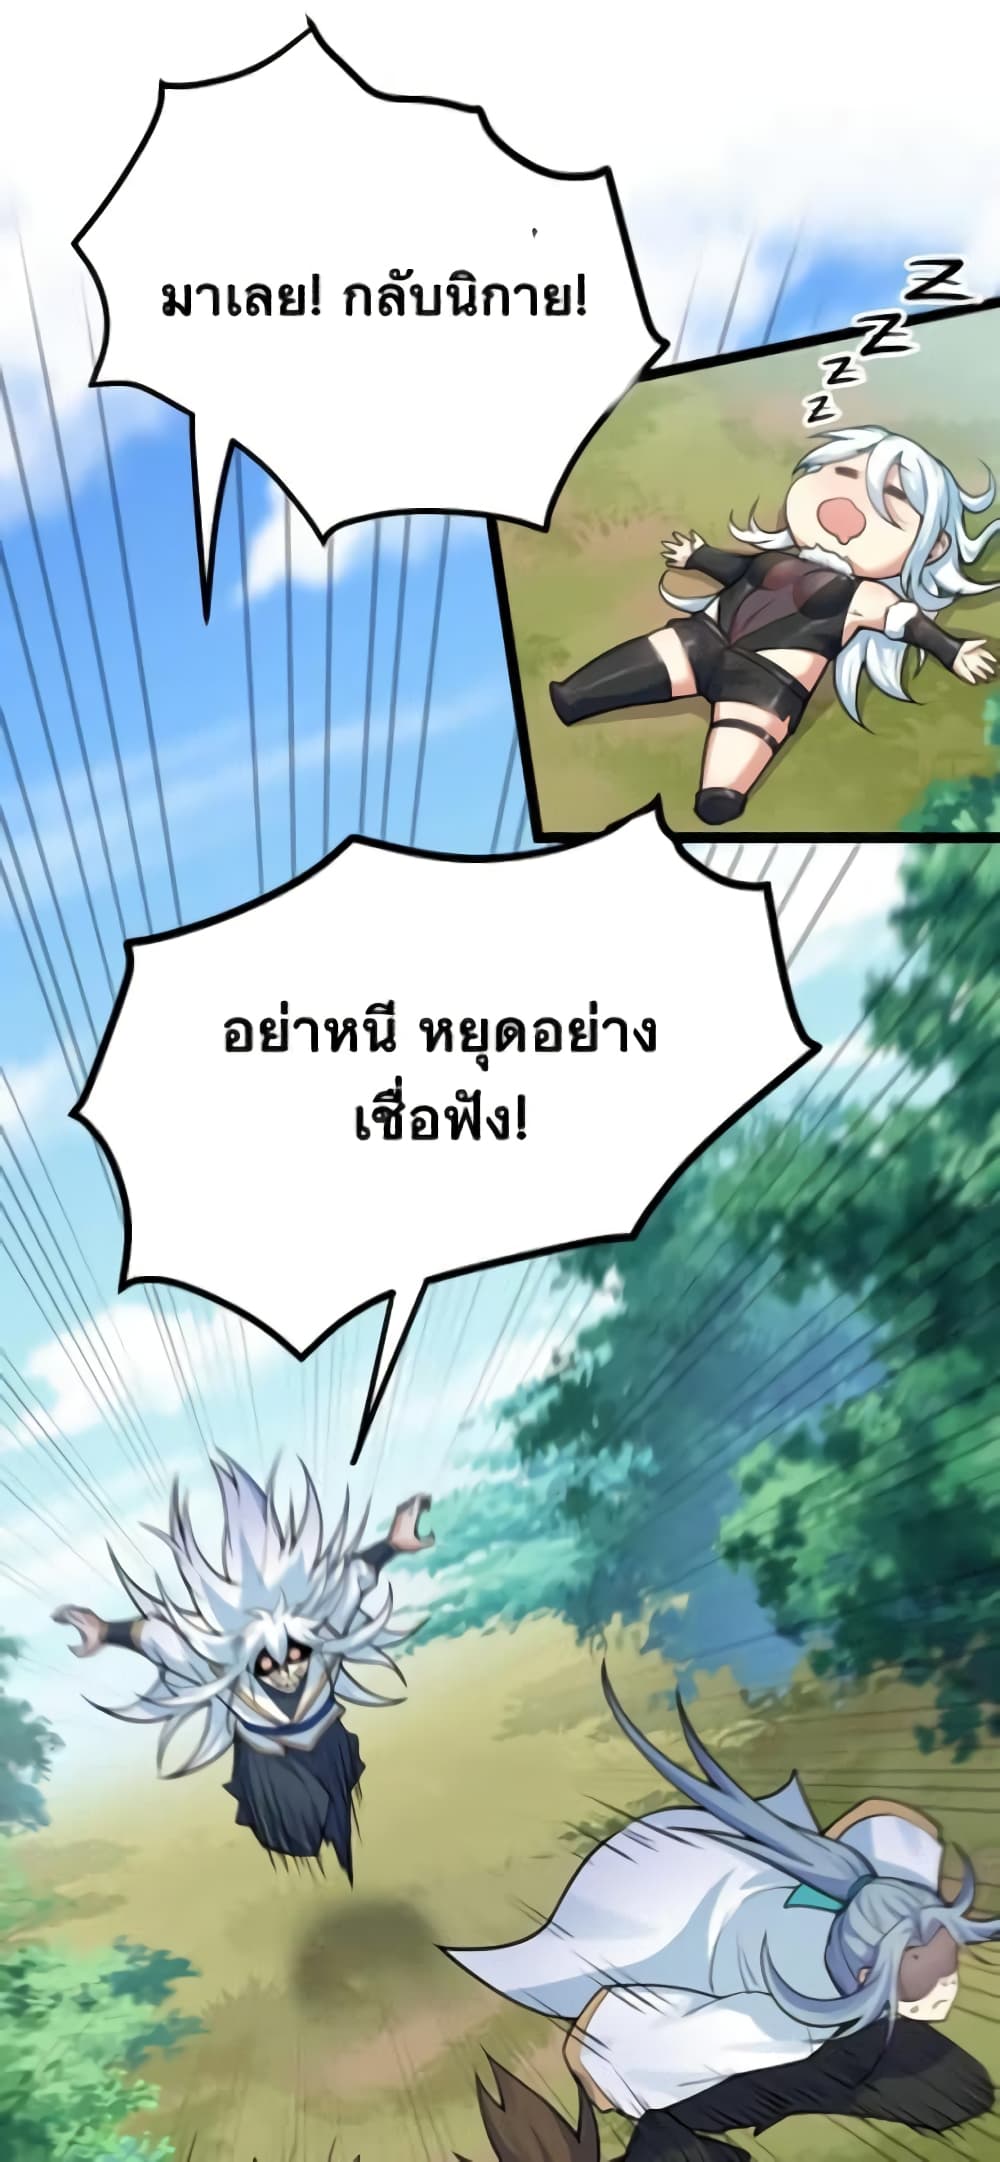 Godsian Masian from Another World ตอนที่ 92 (33)